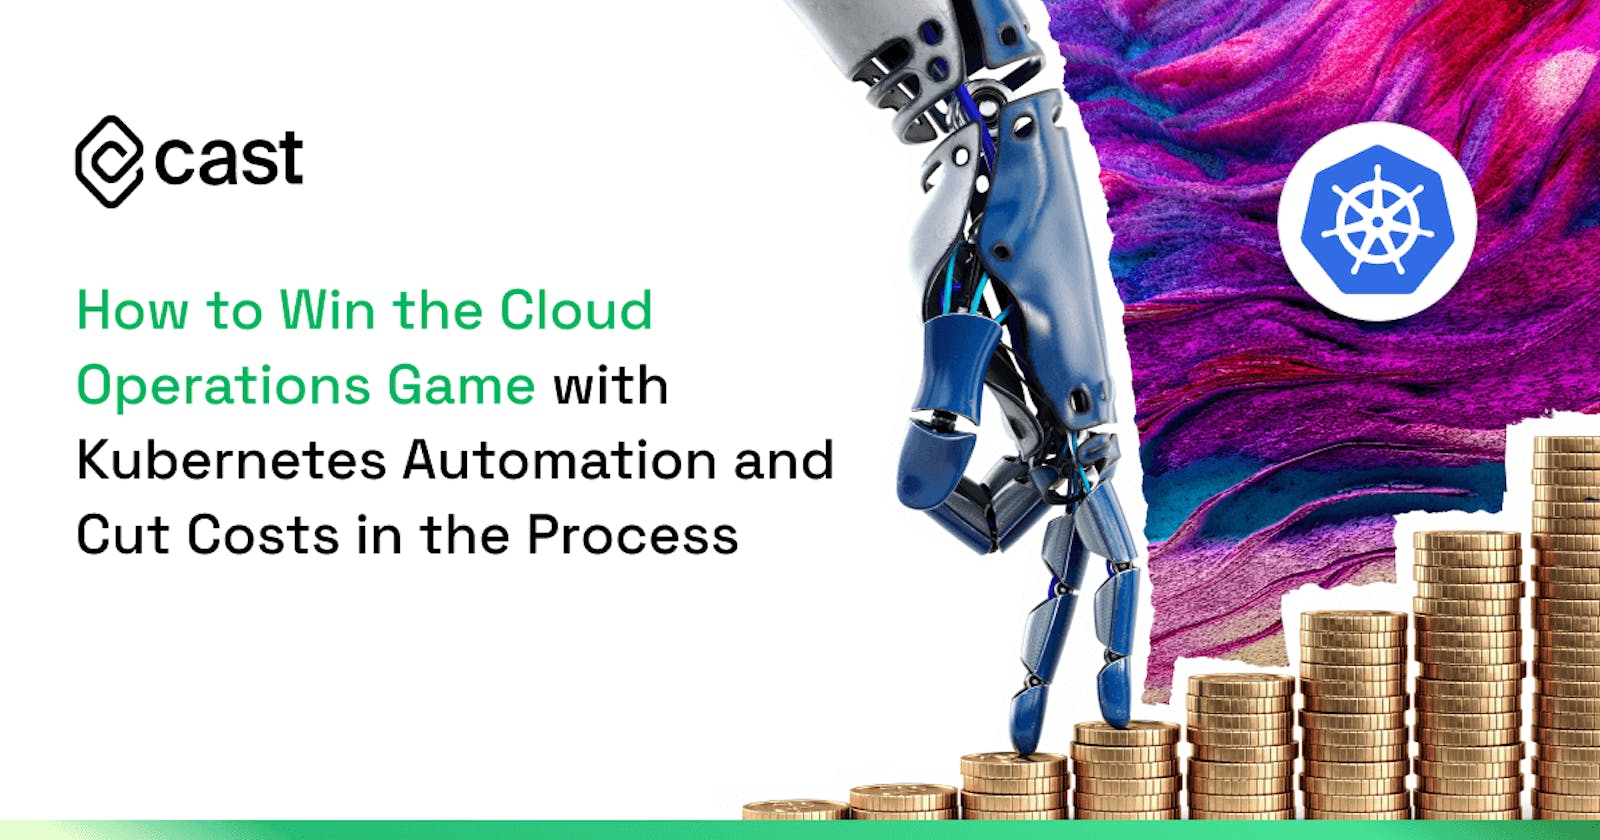 How to Win the Cloud Operations Game with Kubernetes Automation and Cut Costs in the Process